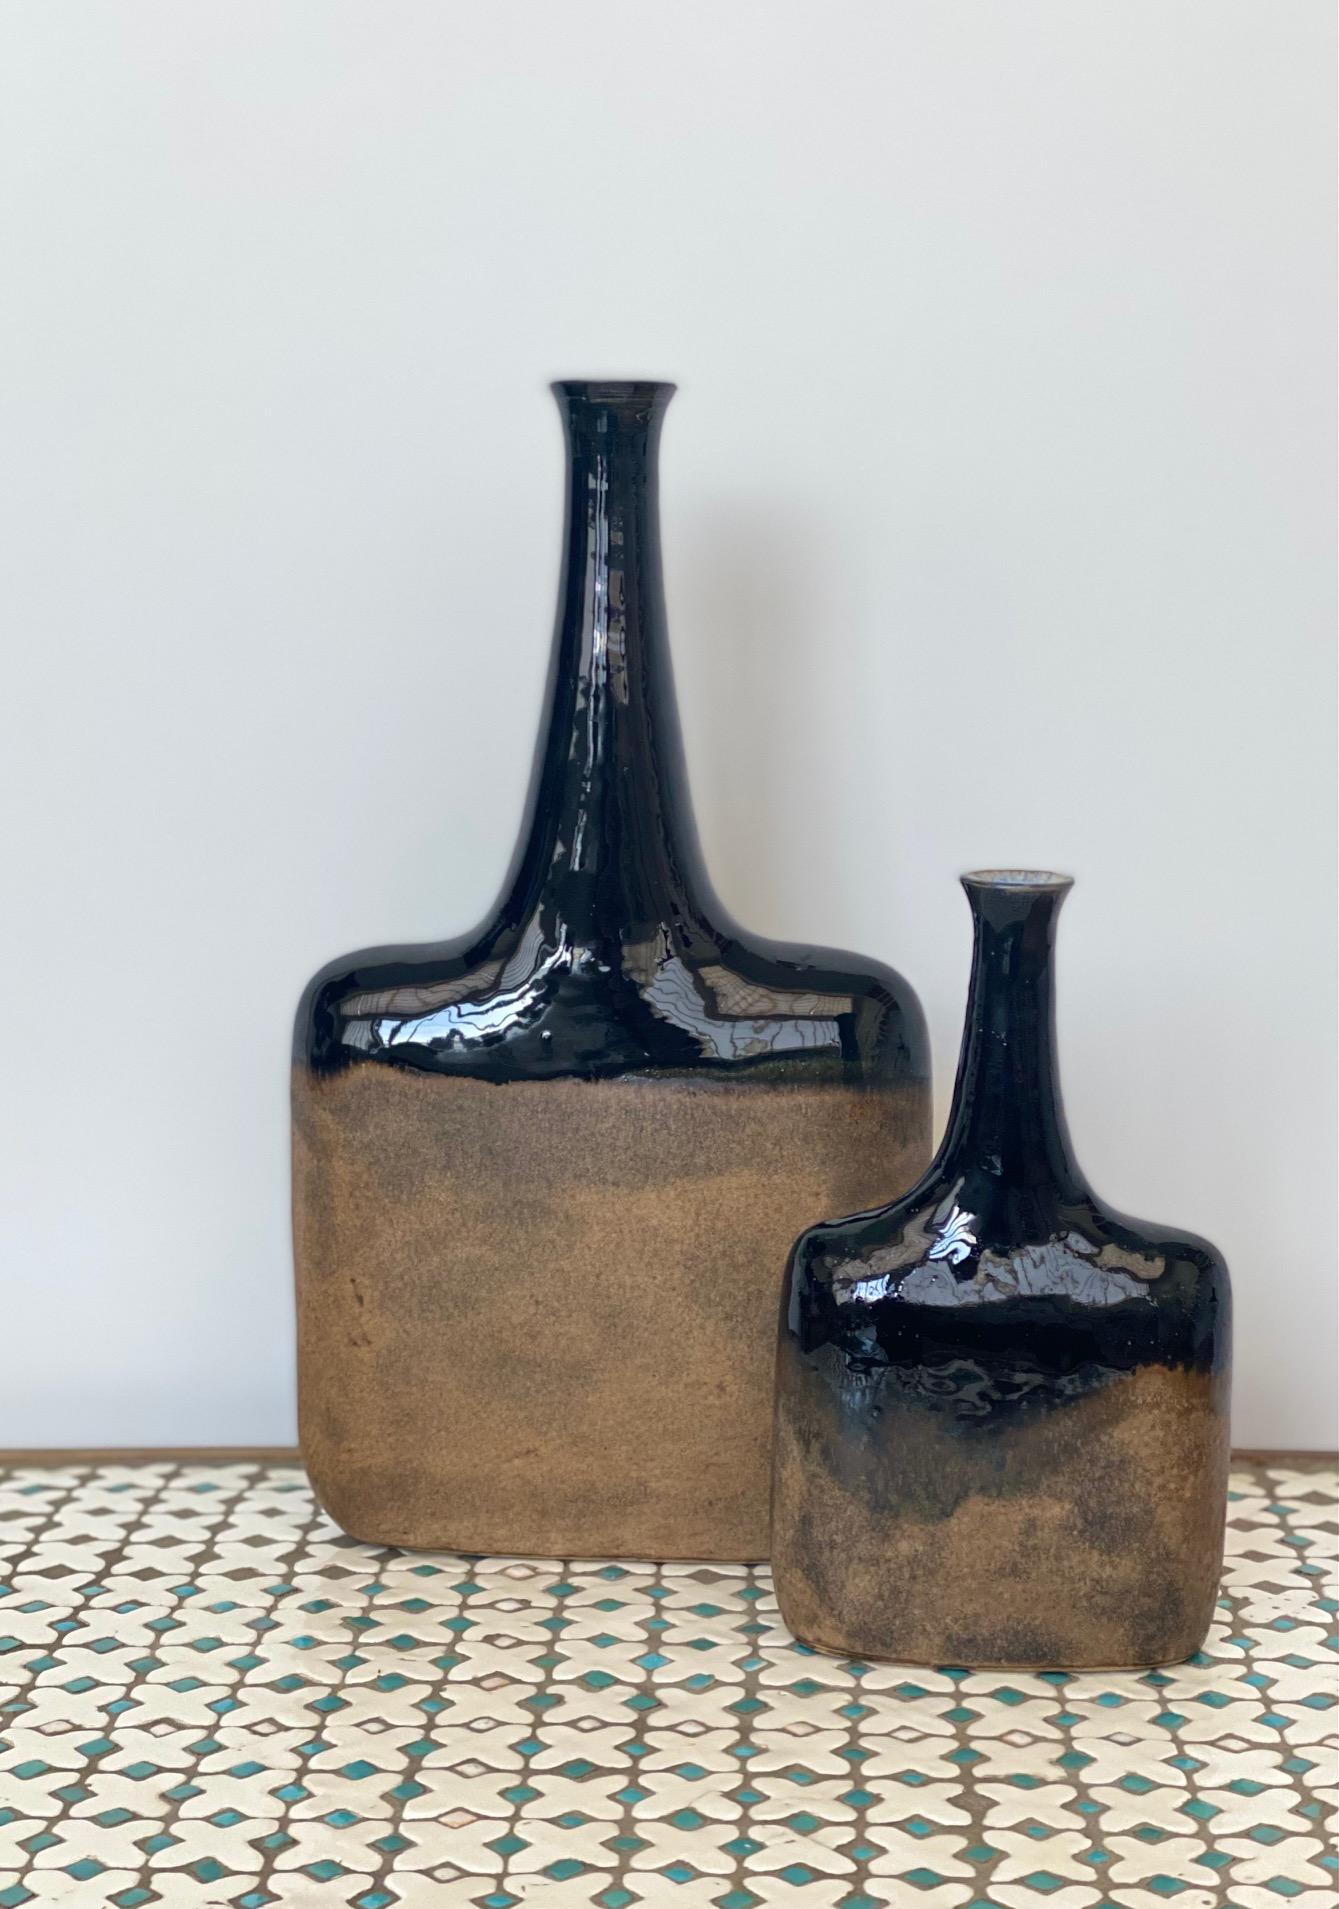 Set of 2 earthenware bottles vases by Bruno Gambone, Italy, 1970s
Signed Gambone Italy.
Measures: heights : 36 cm and 23 cm.